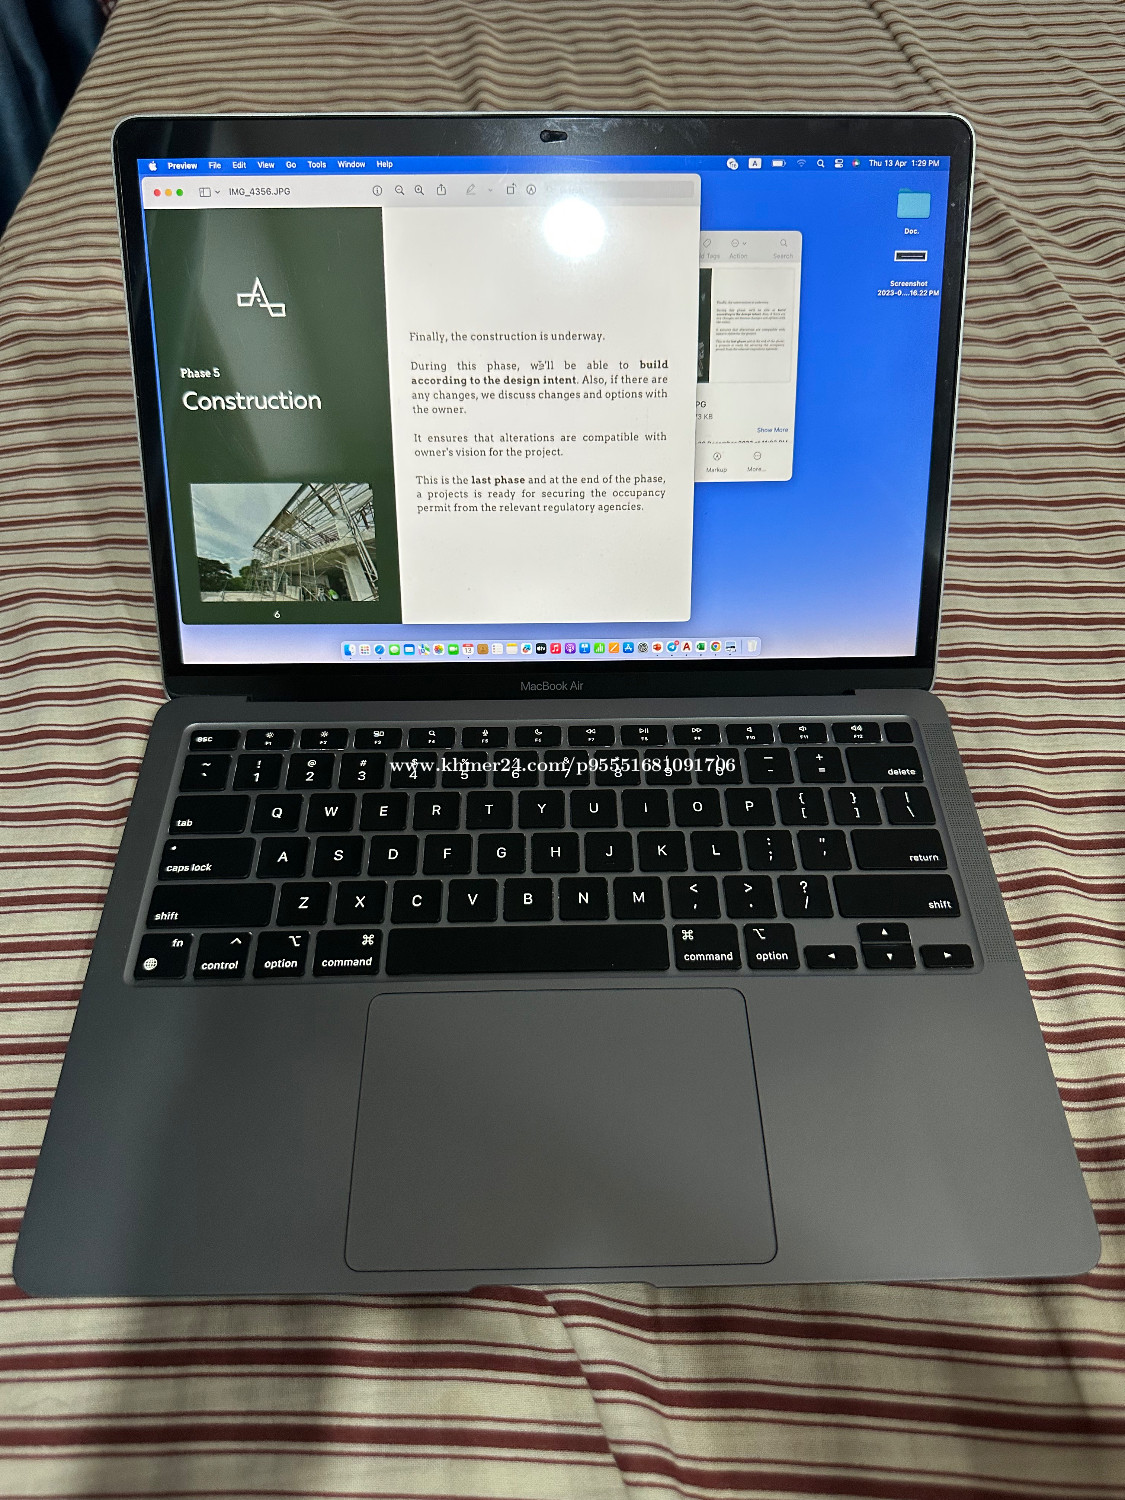 Macbook Air M1 512G 98% with Remaing Coverage Warranty Price $850